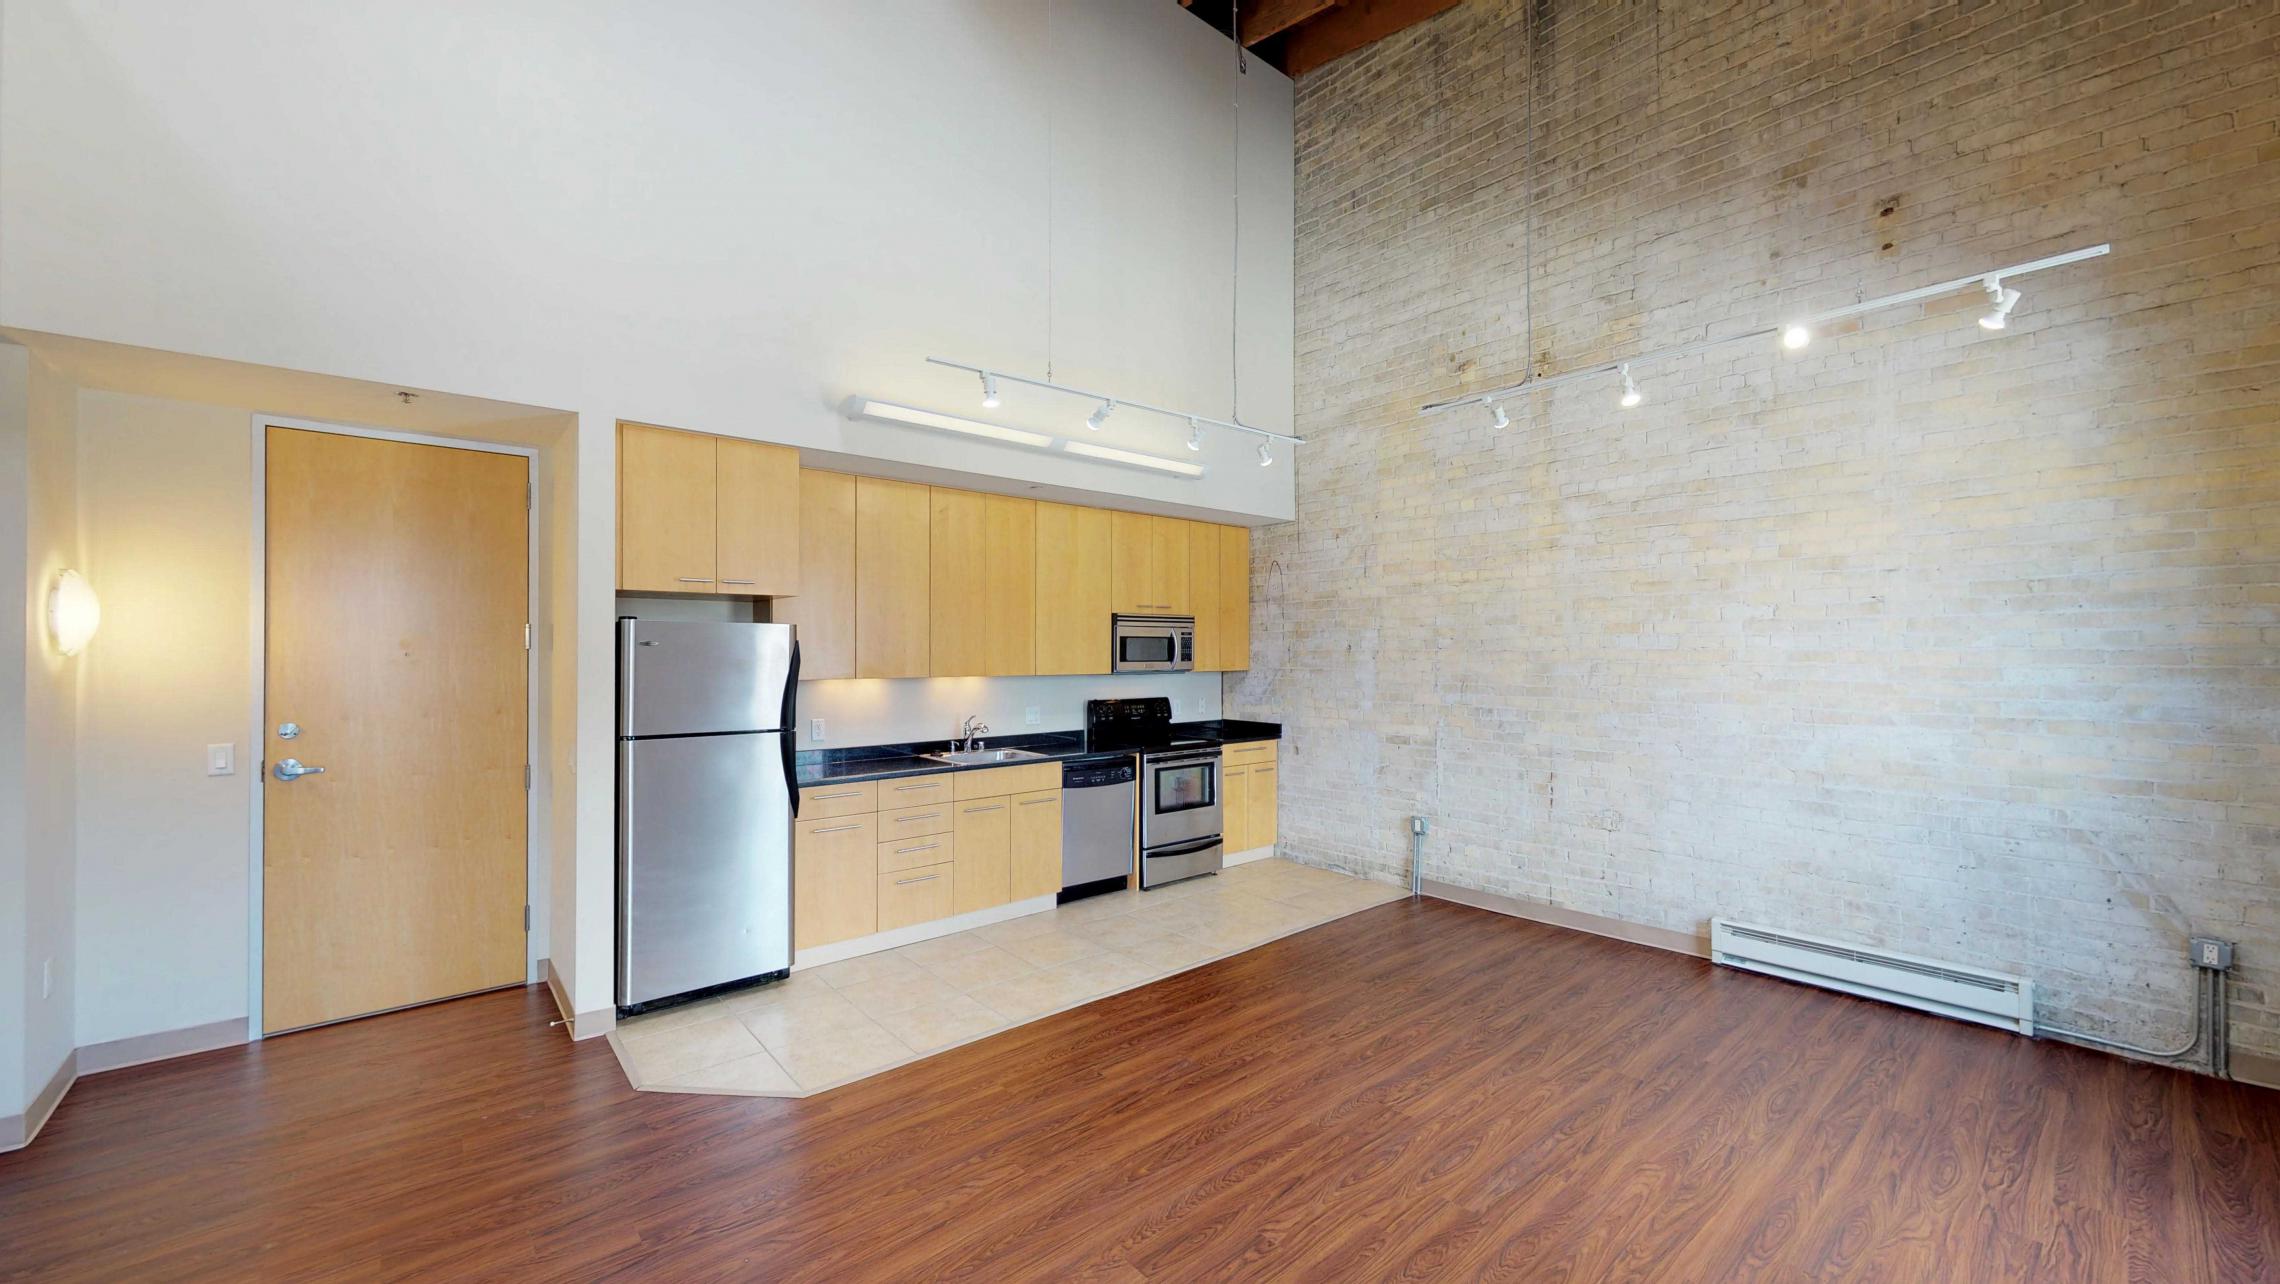 Tobacco-Lofts-Apartment-E307-Historic-Downtown-Lofted-Two-Bedroom-Madison-Exposed-Brick-Design-Beams-Dining